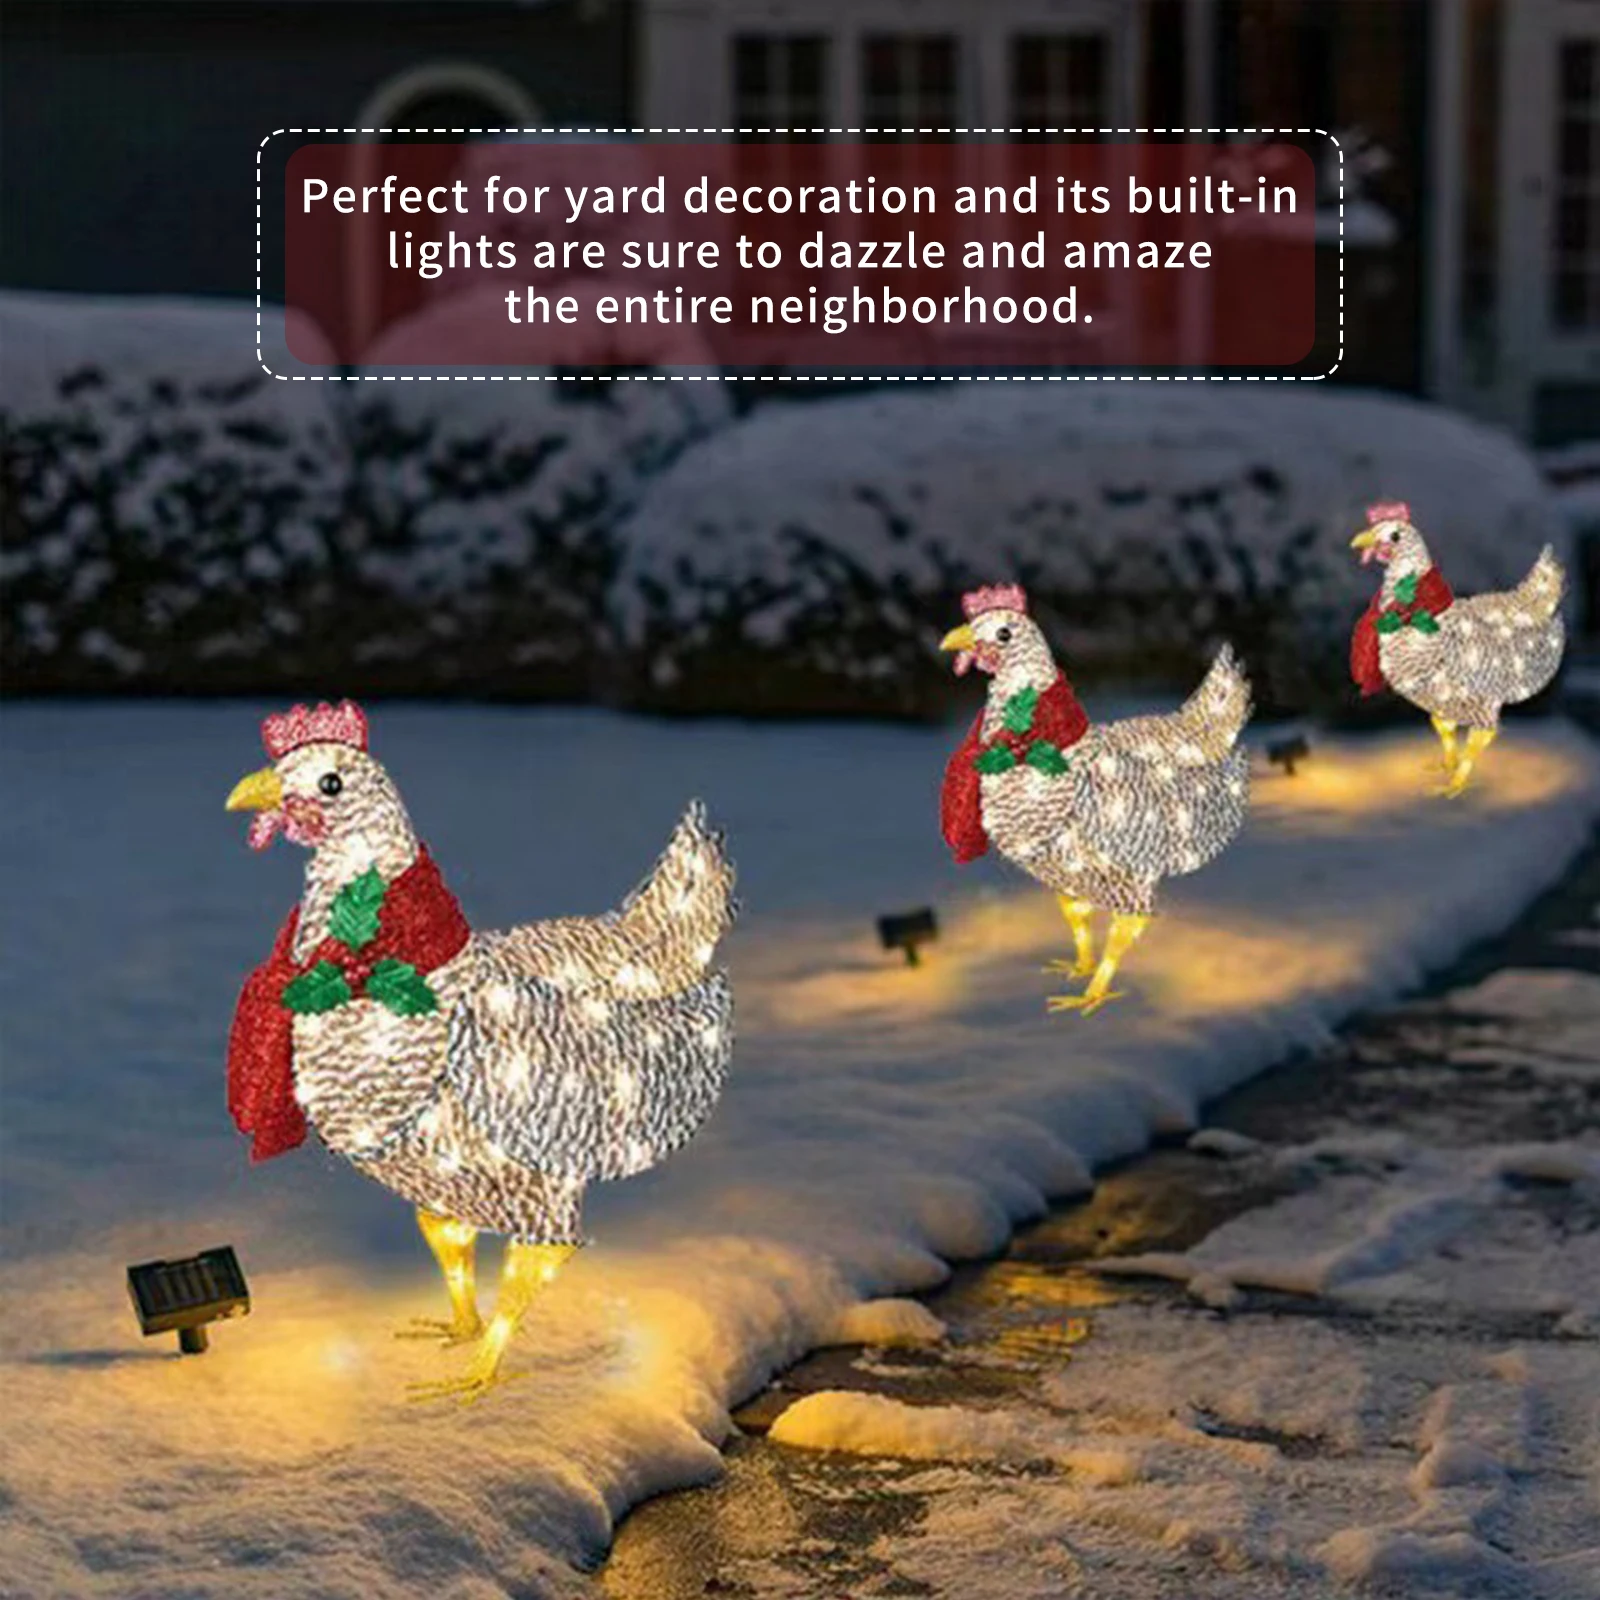 Light-Up Chicken with Scarf Holiday Decoration Glowing Chicken Christmas Ornament Lighting Chicken Lawn Yard Christmas Decor